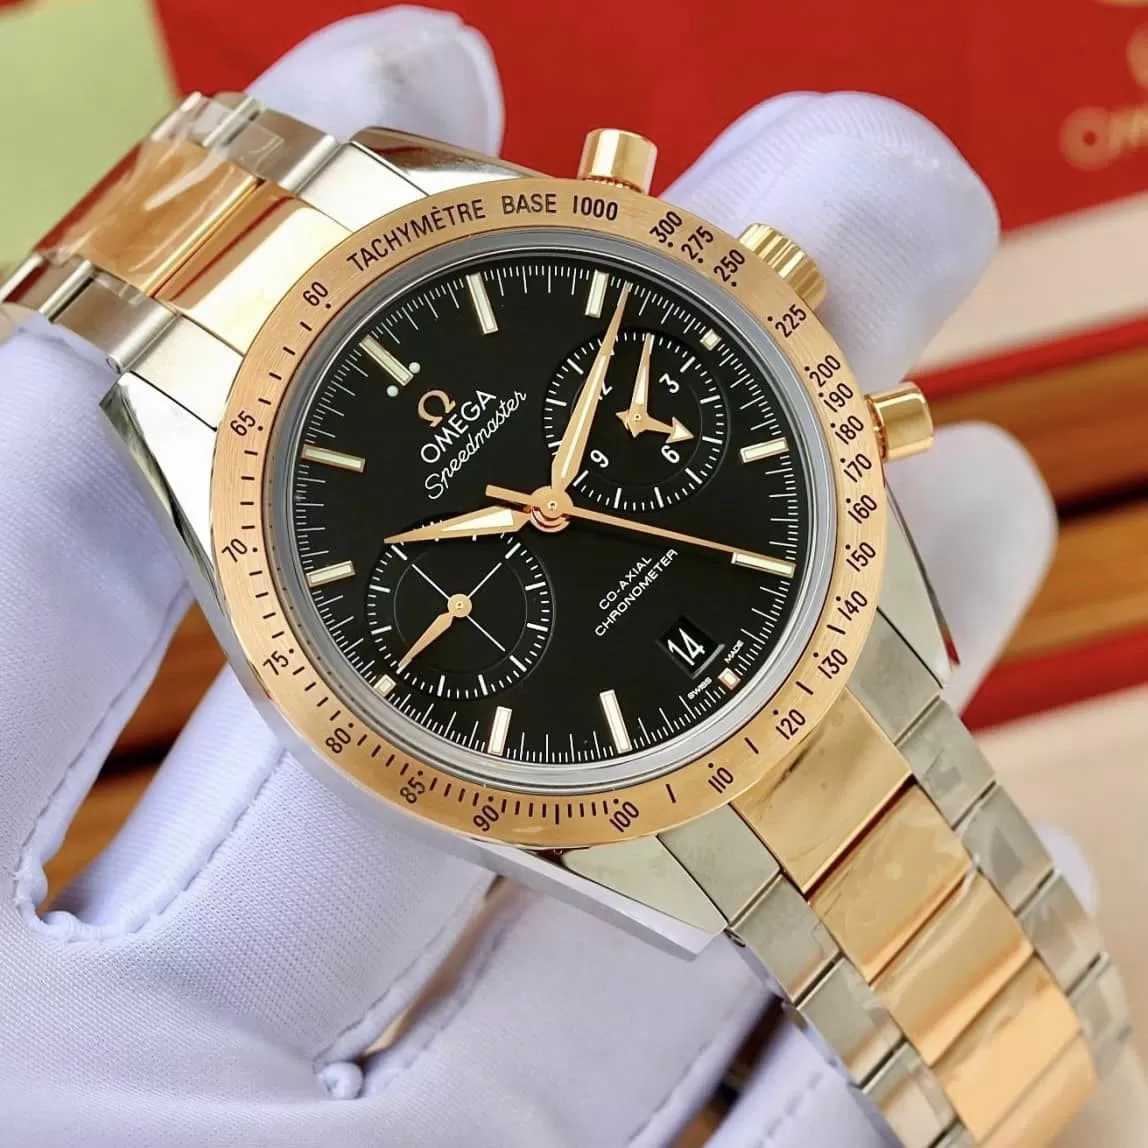 Đồng Hồ Omega Speedmaster Co-Axial Chronograph 331.20.42.51.01.002 33120425101002